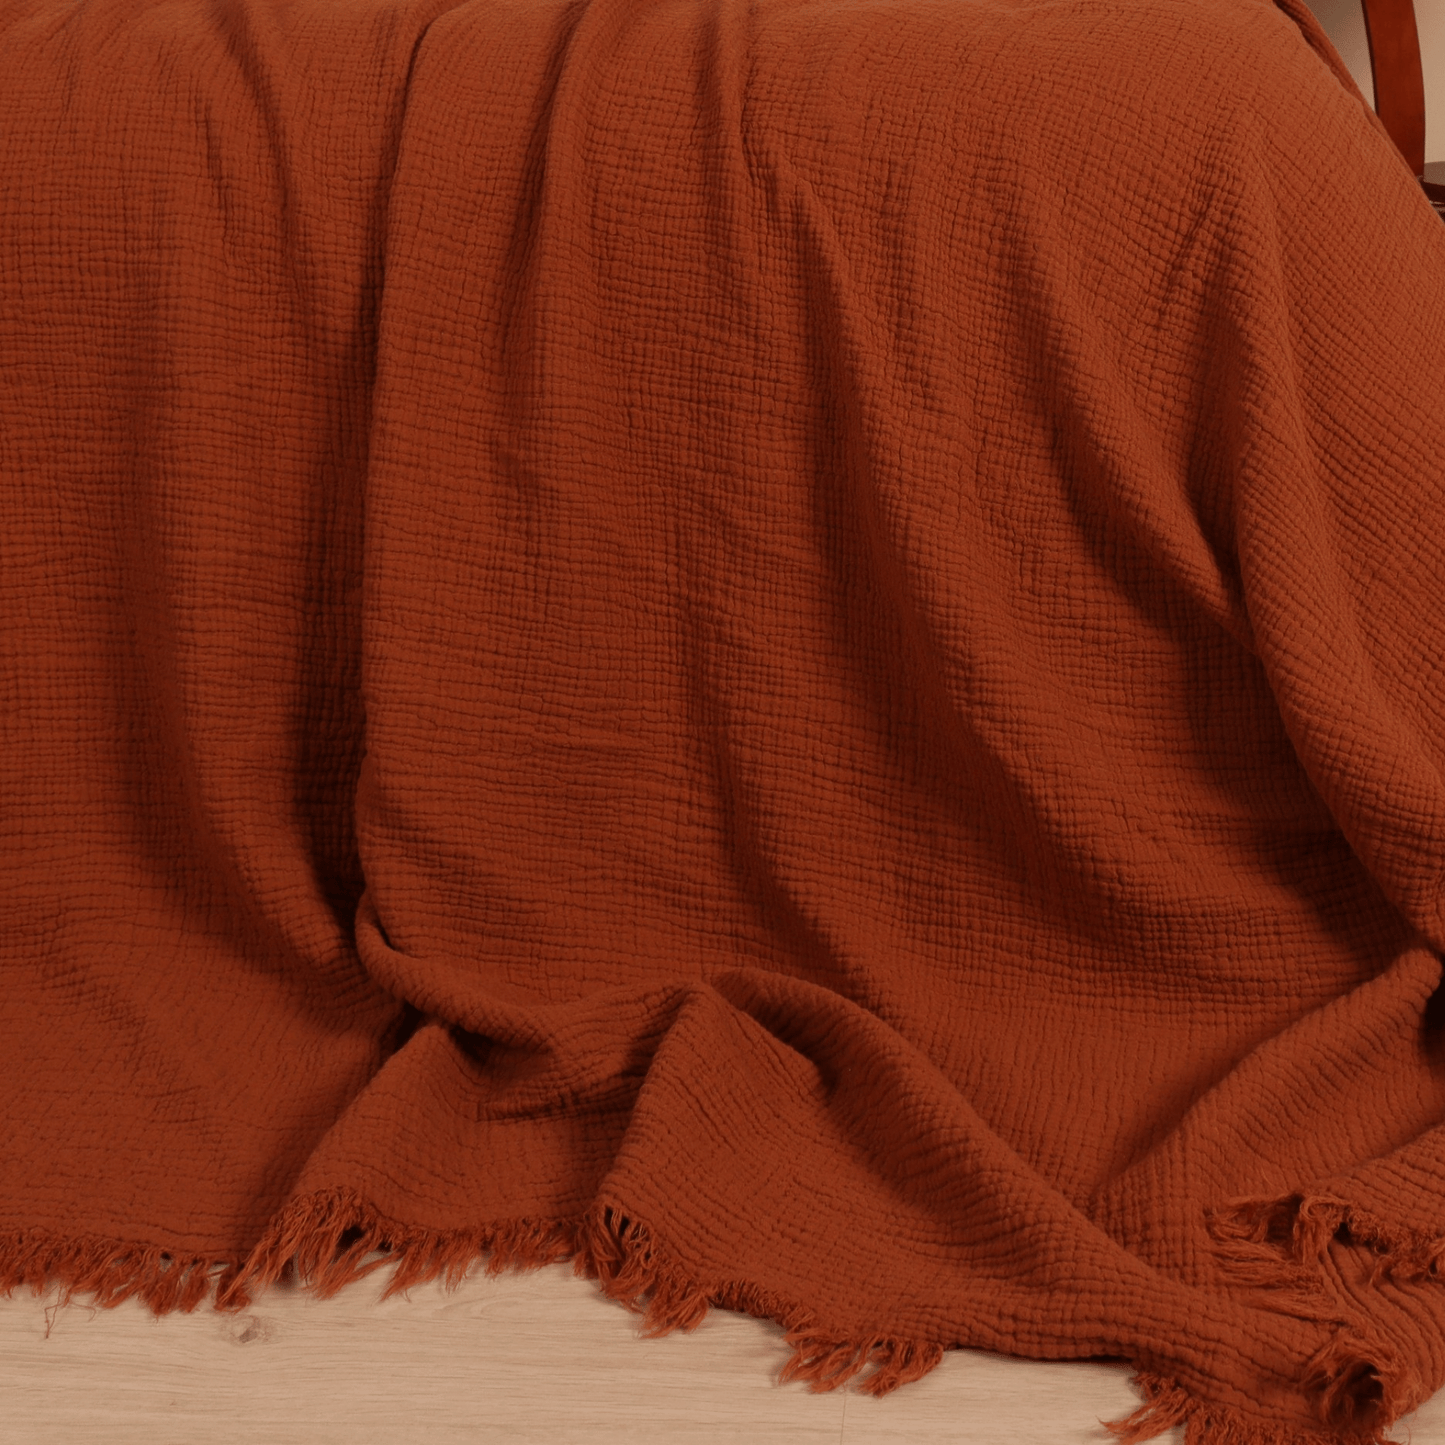 Rust Muslin Blankets for Adults